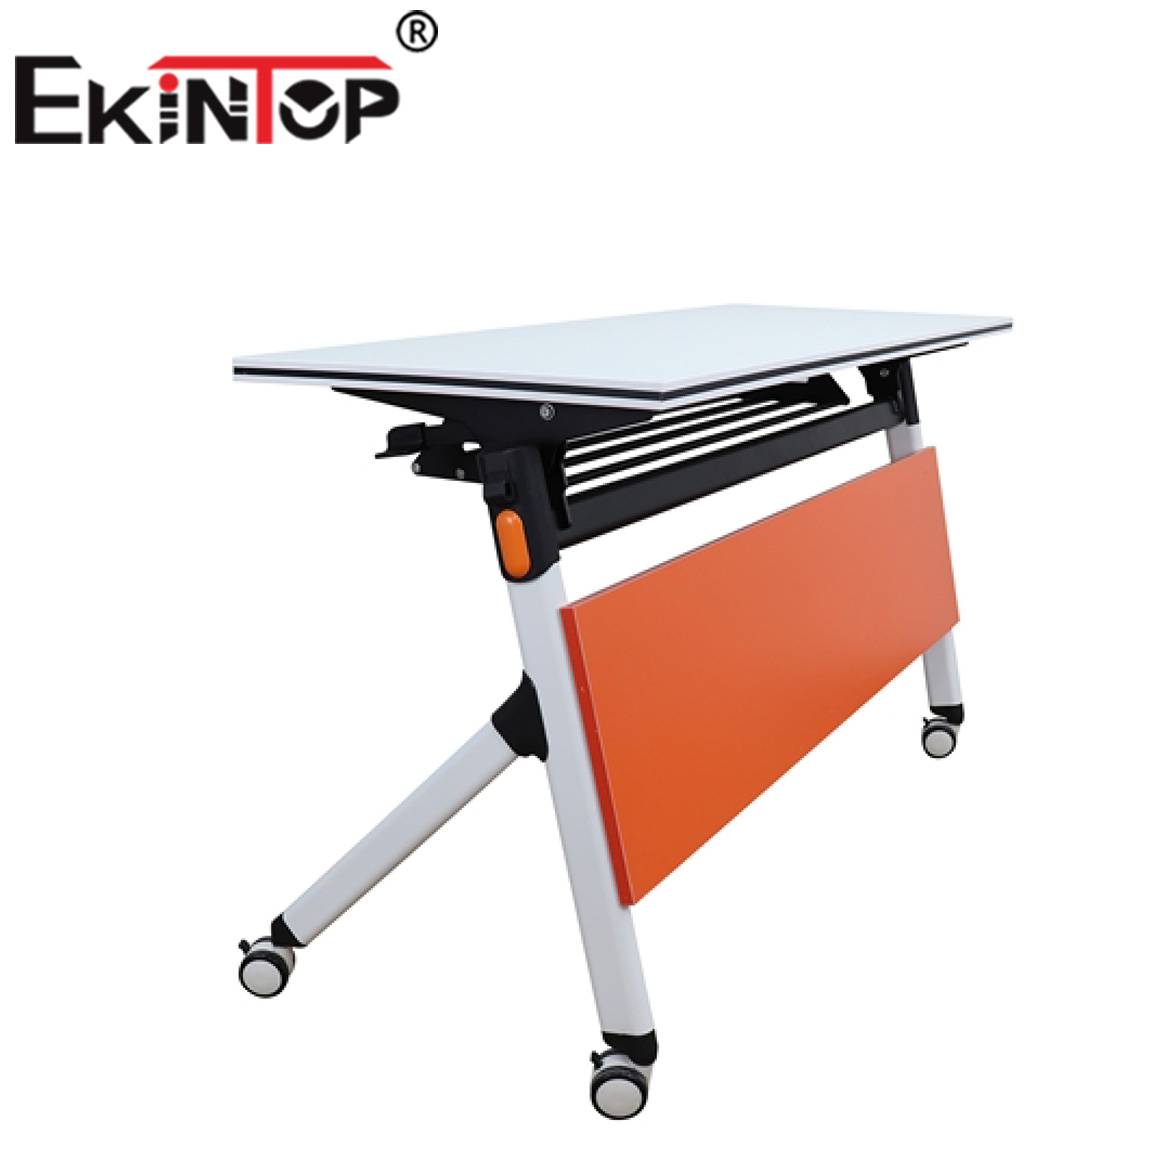 Folding training table manufacturers in office furniture from Ekintop